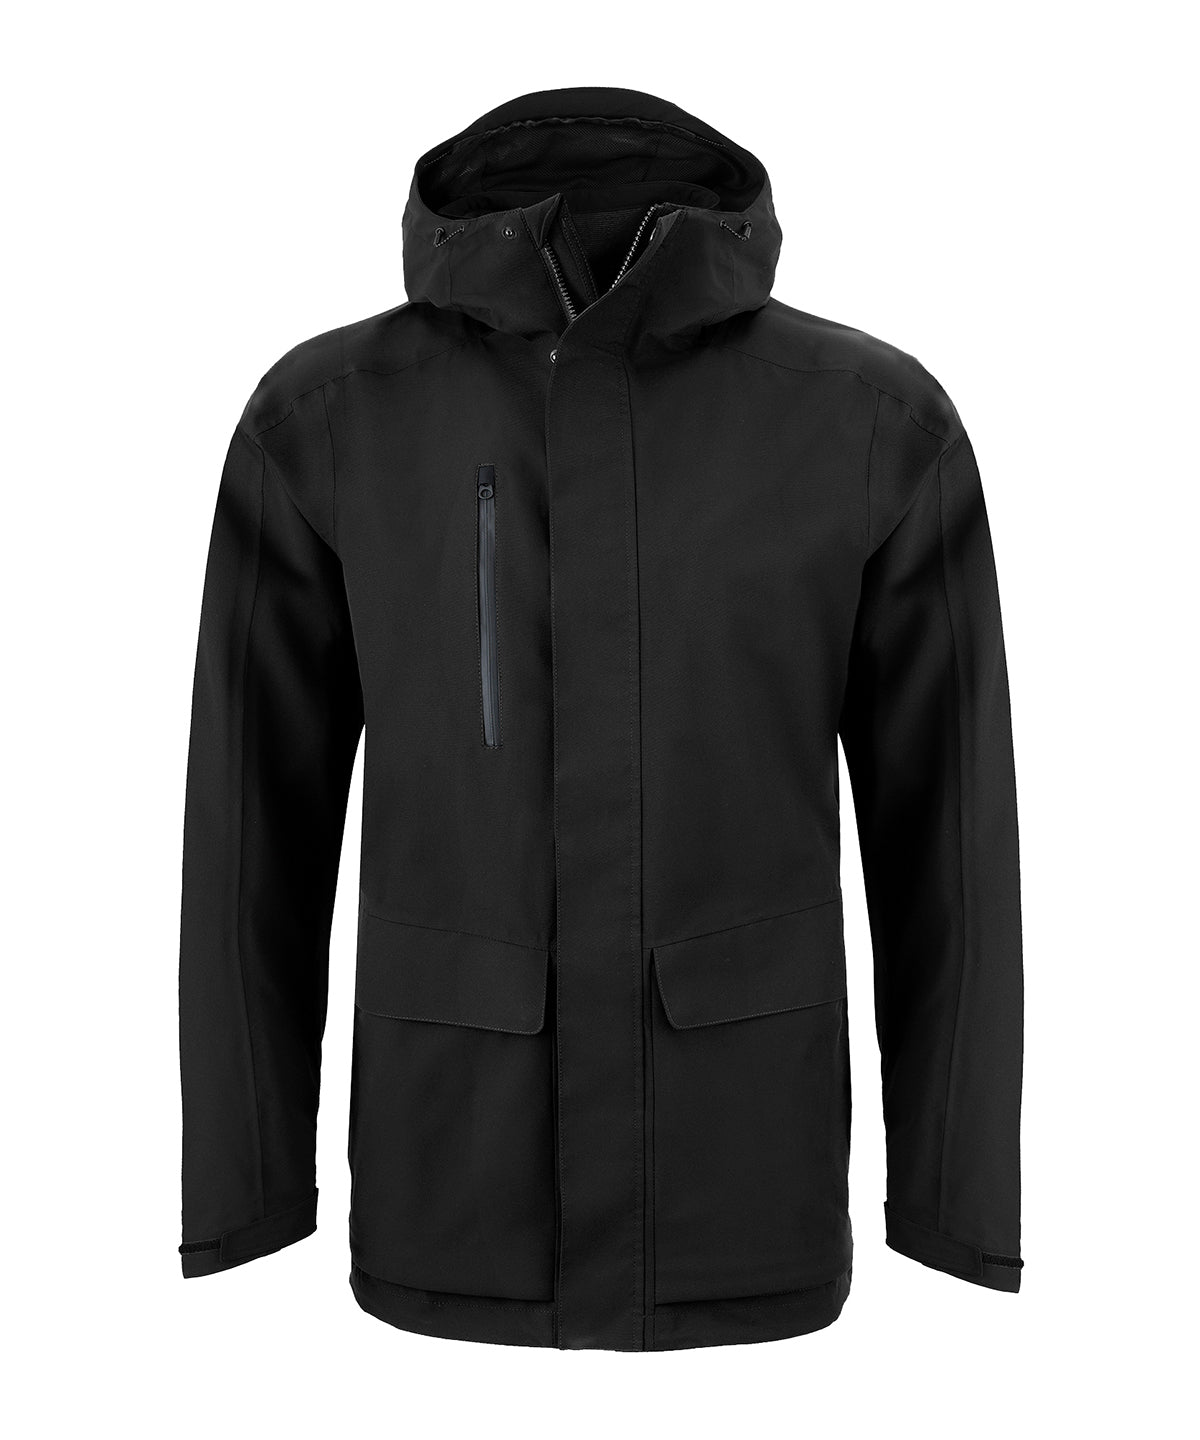 Personalised Jackets - Black Craghoppers Expert Kiwi pro stretch 3-in-1 jacket